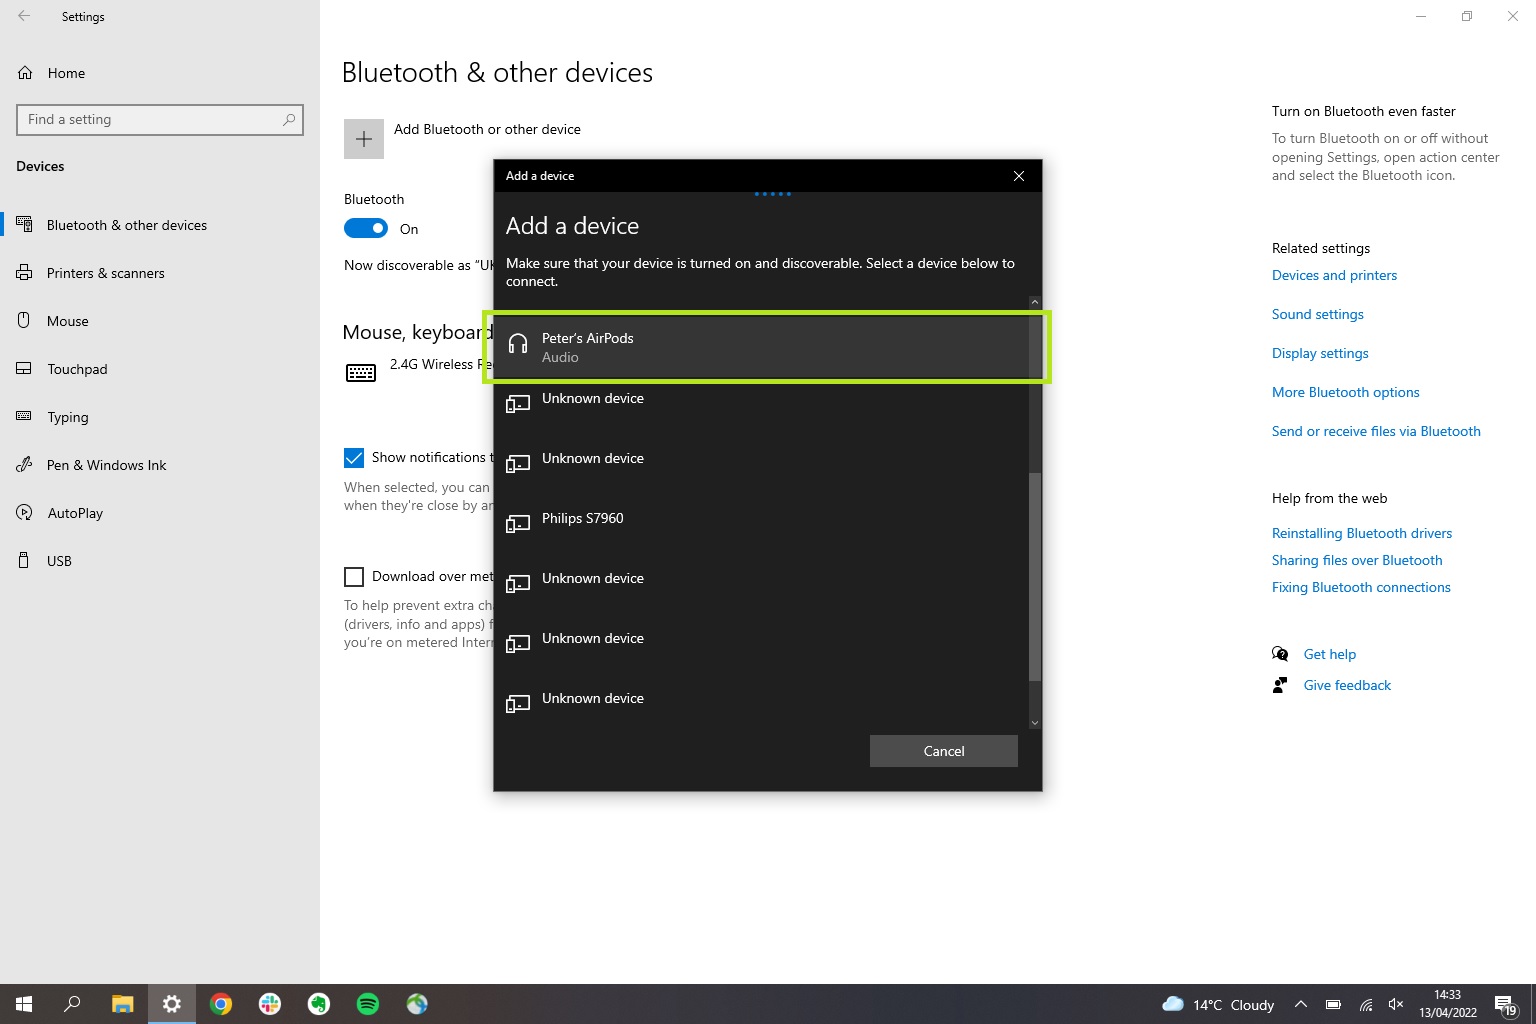 A screenshot showing the Windows 10 Bluetooth device pairing list, demonstrating how to connect AirPods to a PC